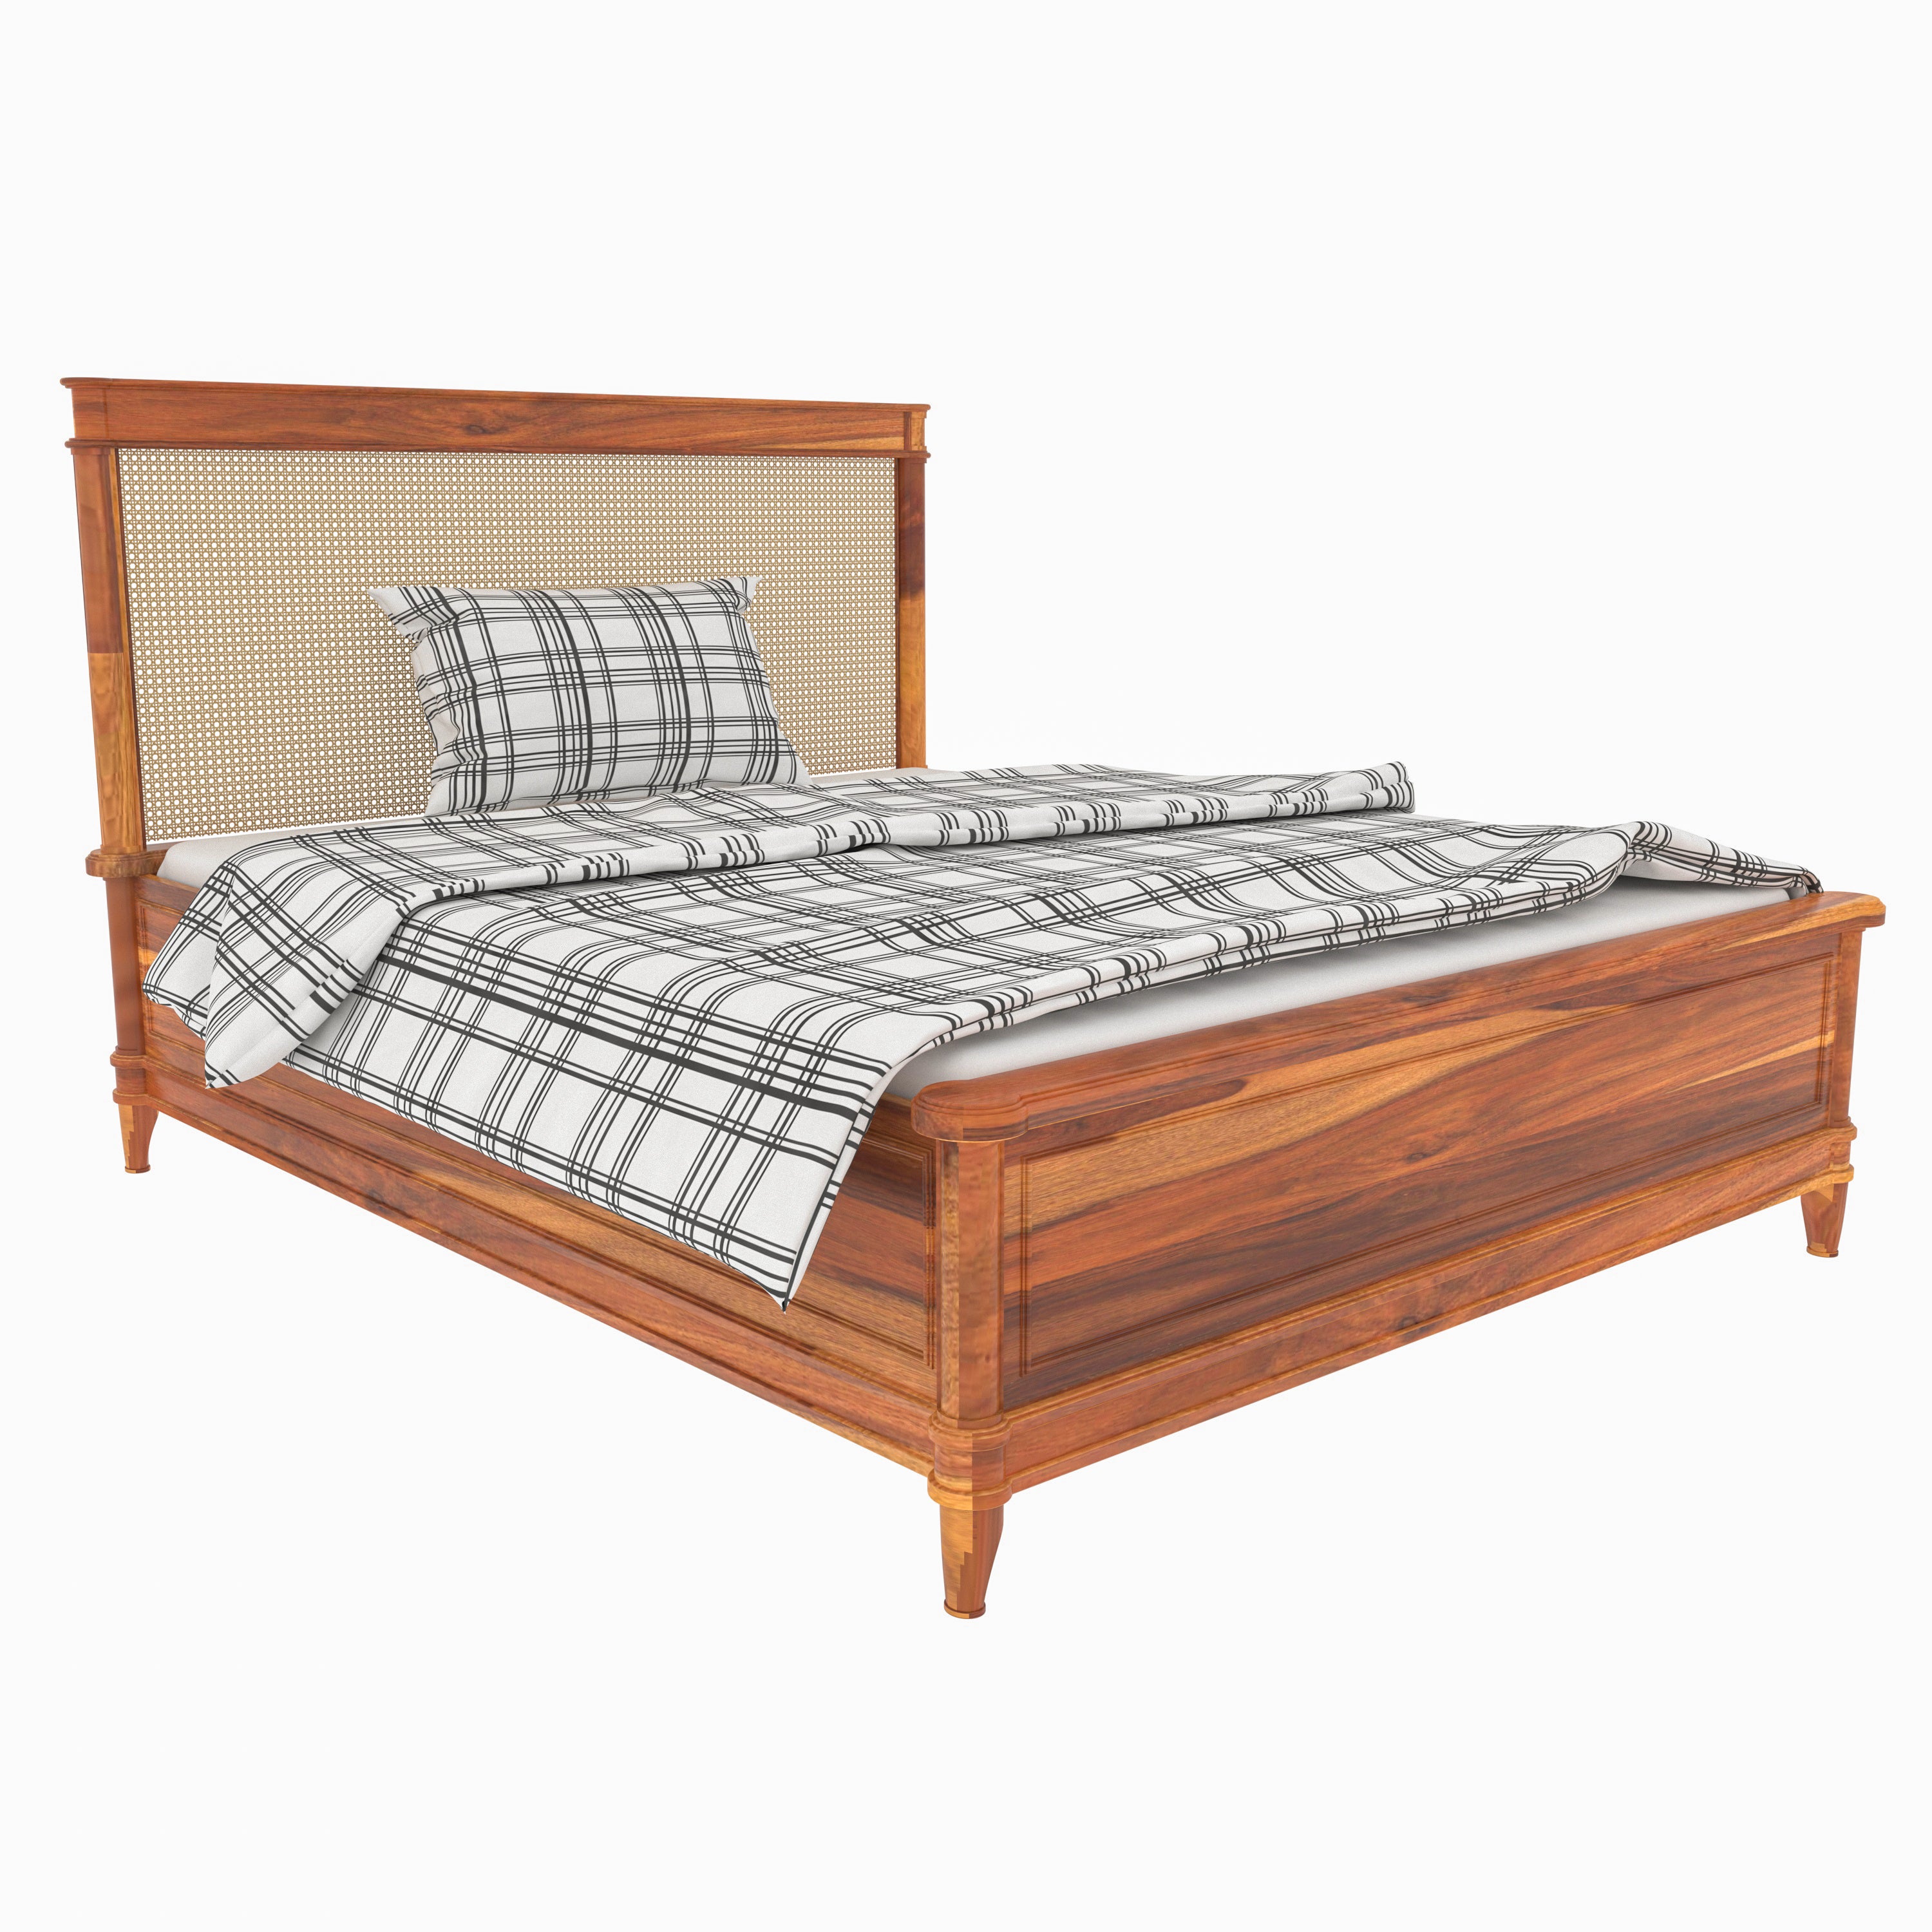 Rustic Heritage Style Handmade Wooden Bed with Attractive Wooden Bedside Bedroom Furniture Sets